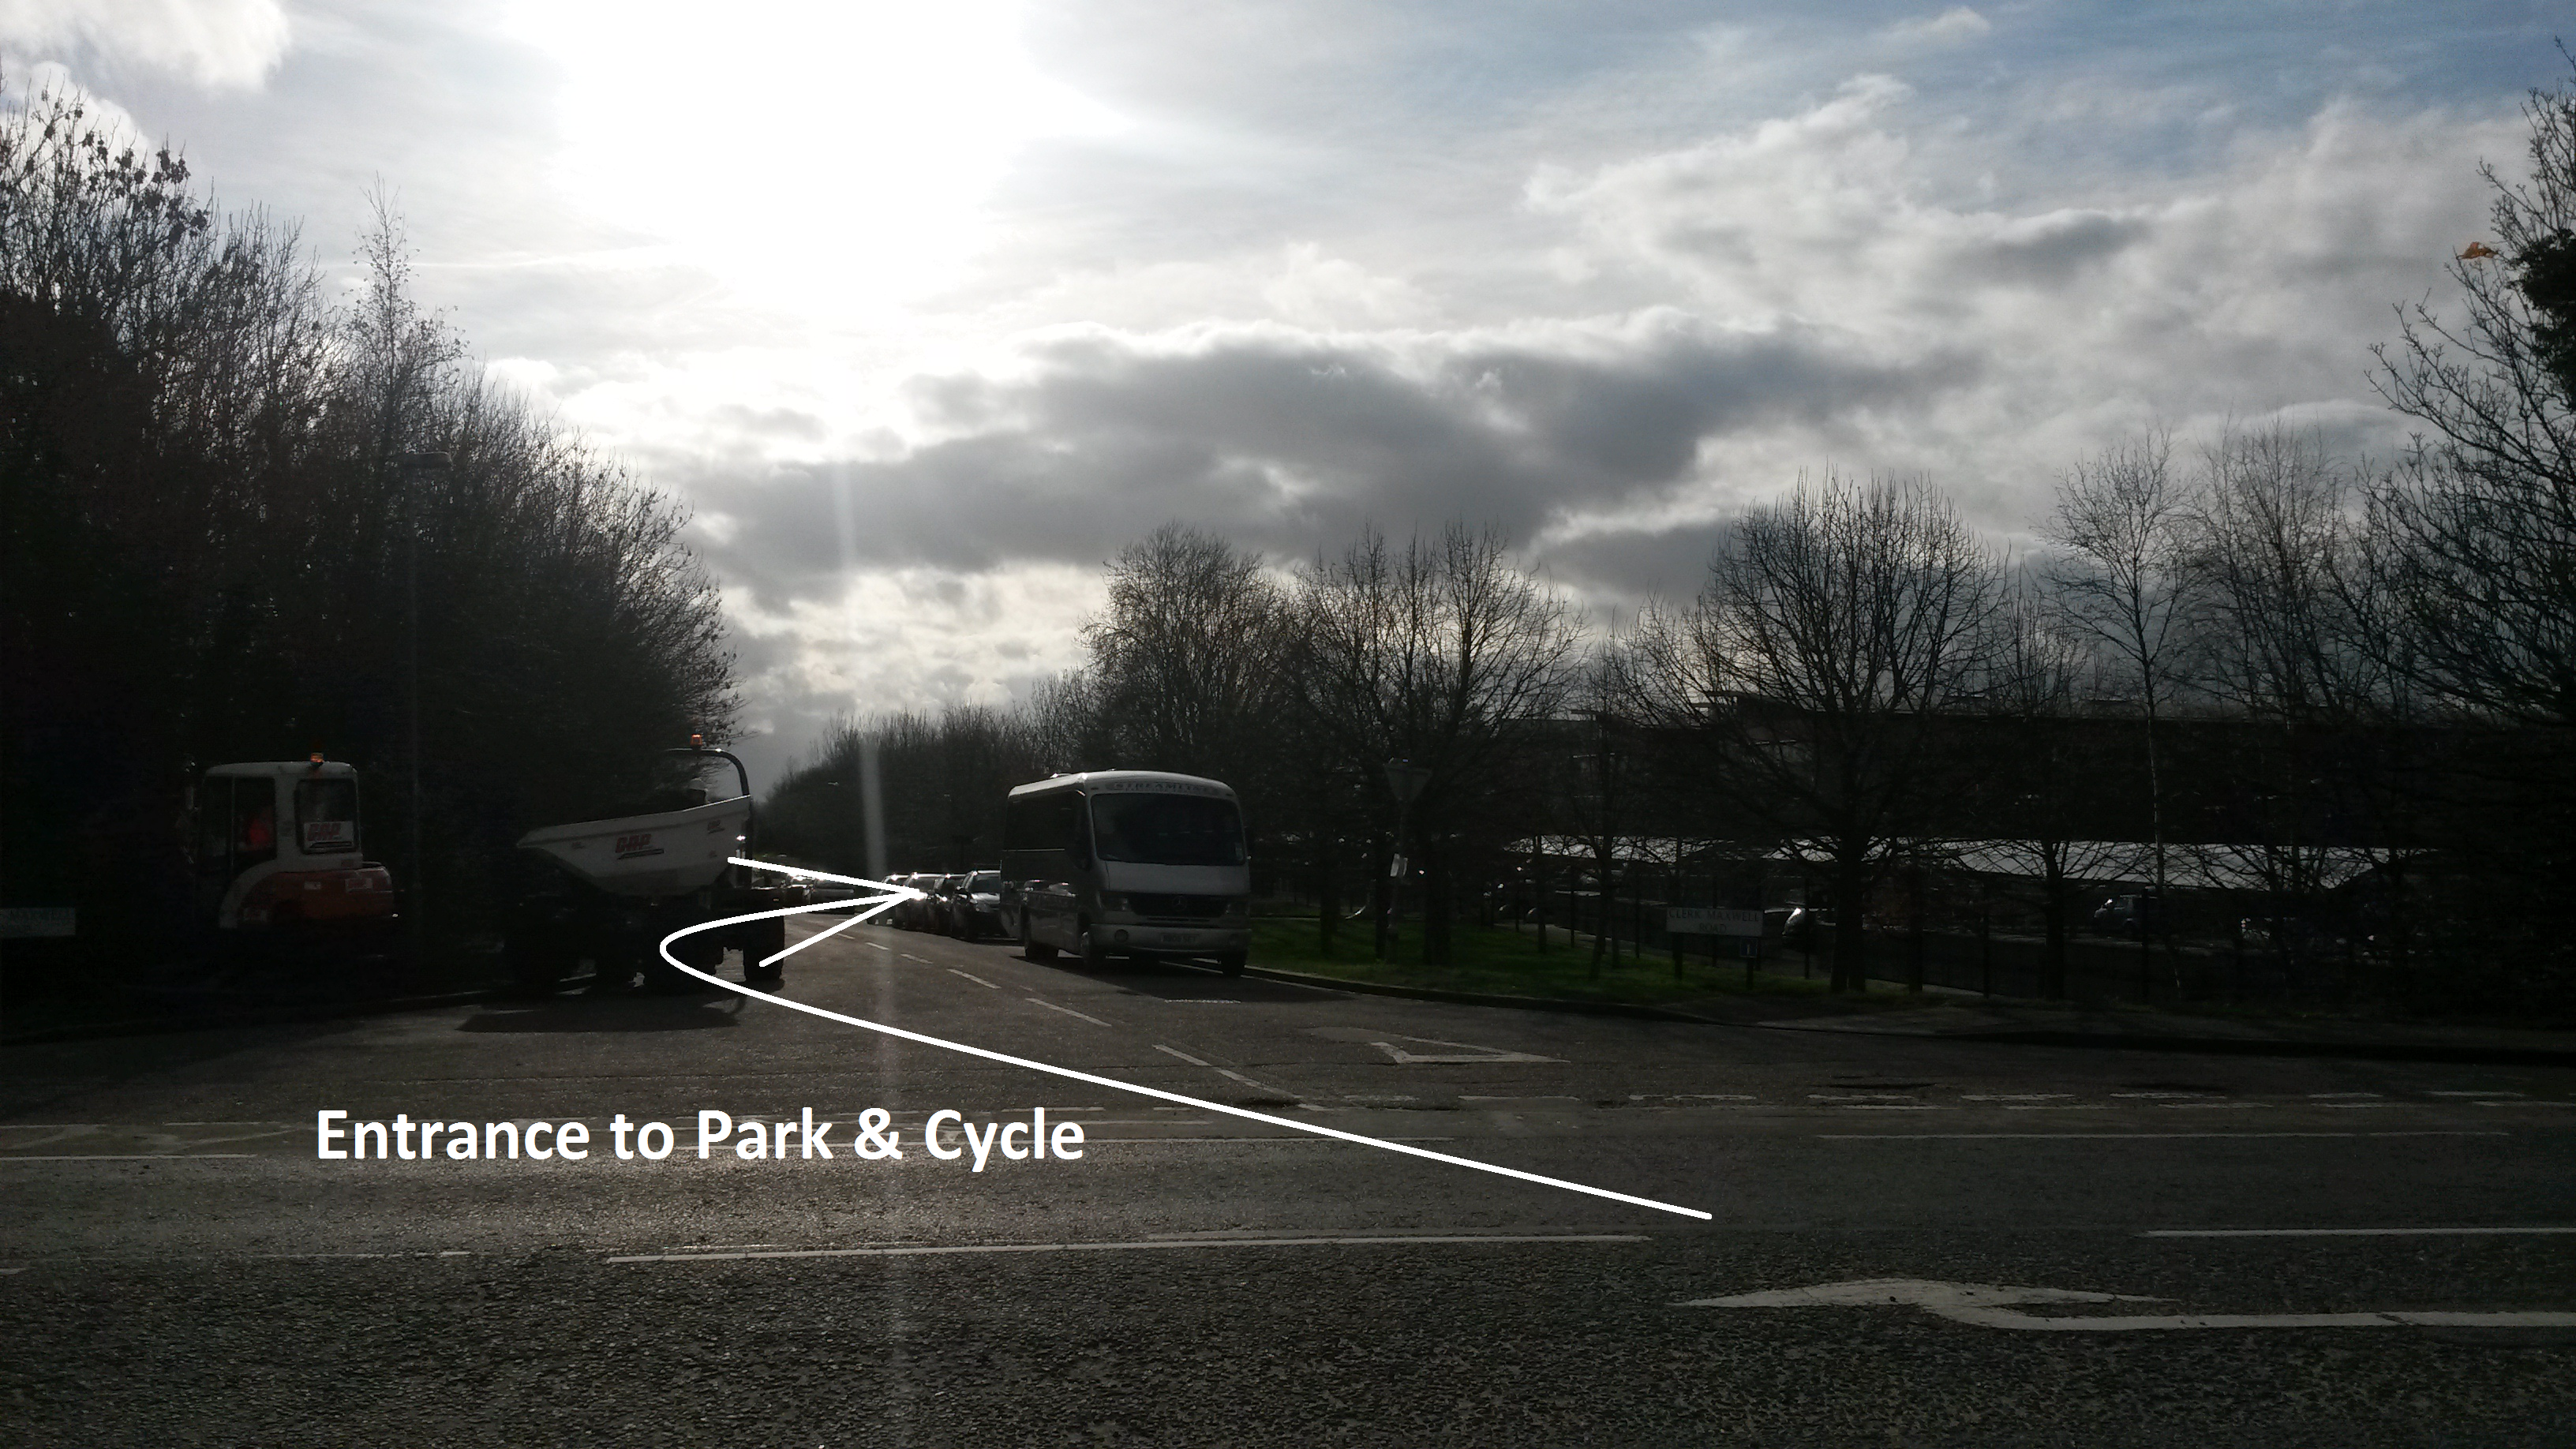 Entrance to Clerk Maxwell Road. The Park & Cycle is on the right.